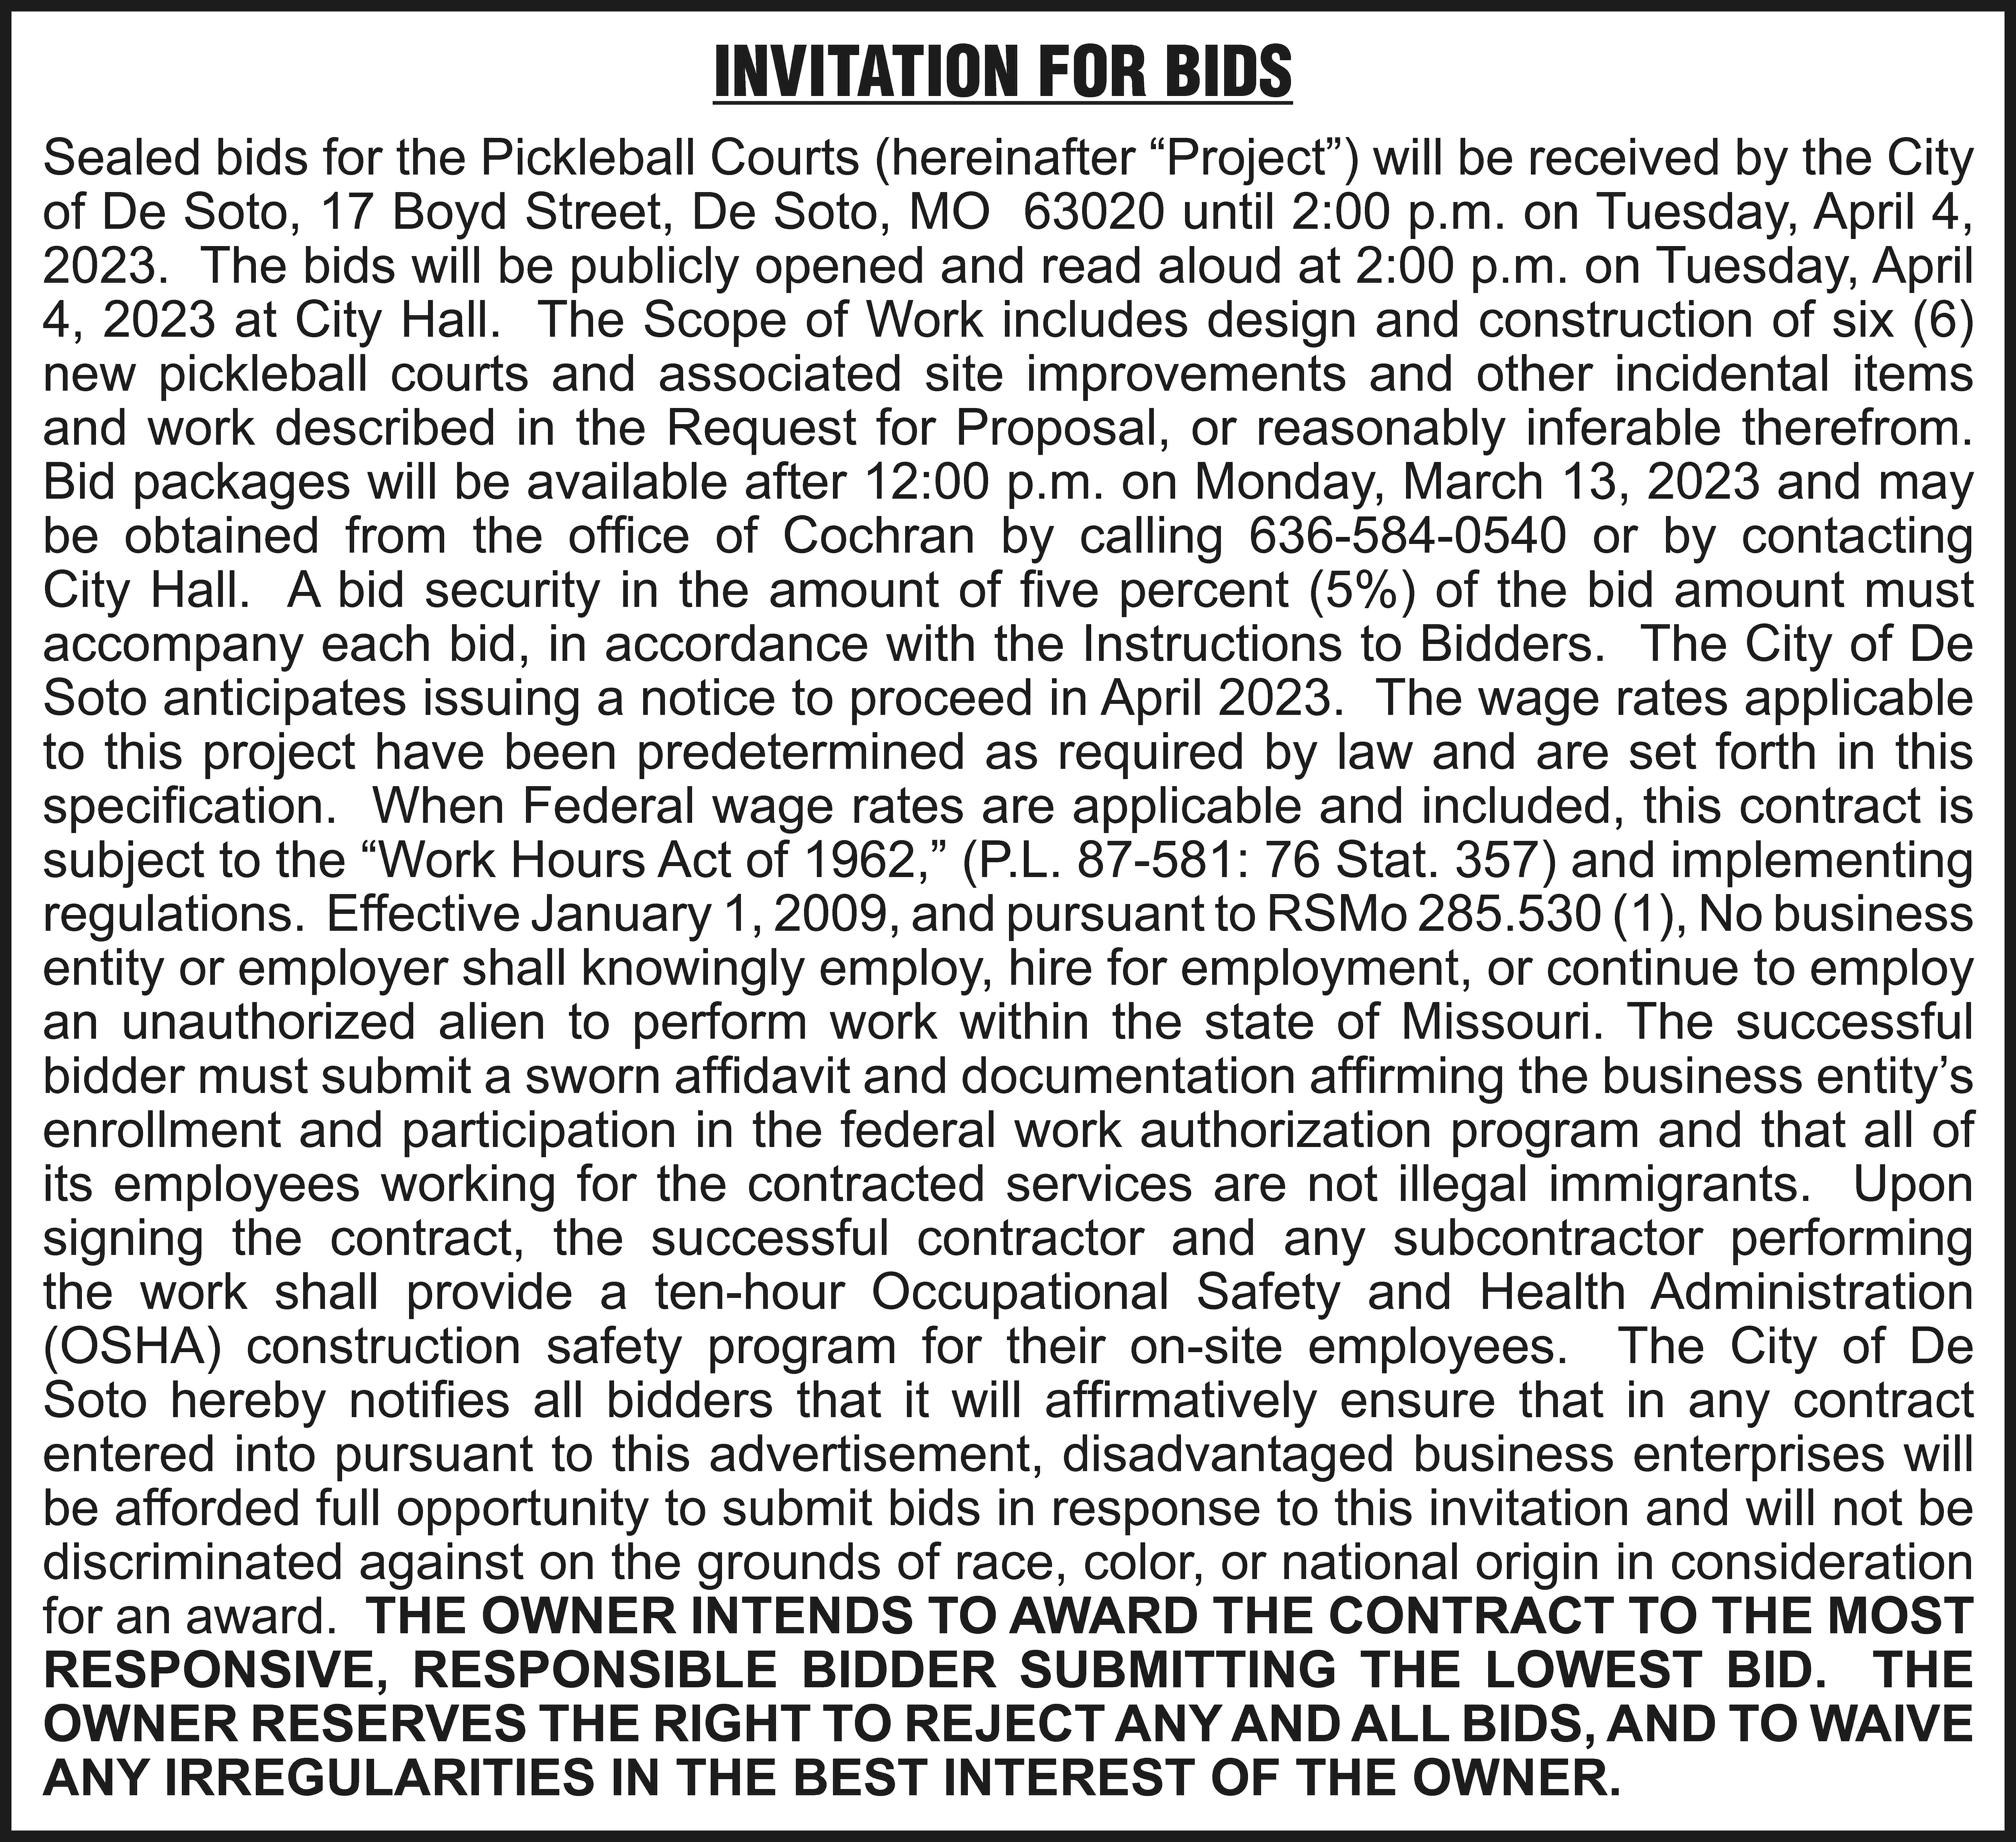 INVITATION FOR BIDS Sealed bids  INVITATION FOR BIDS Sealed bids for the Pickleball Courts (hereinafter “Project”) will be received by the City of De Soto, 17 Boyd Street, De Soto, MO 63020 until 2:00 p.m. on Tuesday, April 4, 2023. The bids will be publicly opened and read aloud at 2:00 p.m. on Tuesday, April 4, 2023 at City Hall. The Scope of Work includes design and construction of six (6) new pickleball courts and associated site improvements and other incidental items and work described in the Request for Proposal, or reasonably inferable therefrom. Bid packages will be available after 12:00 p.m. on Monday, March 13, 2023 and may be obtained from the office of Cochran by calling 636-584-0540 or by contacting City Hall. A bid security in the amount of five percent (5%) of the bid amount must accompany each bid, in accordance with the Instructions to Bidders. The City of De Soto anticipates issuing a notice to proceed in April 2023. The wage rates applicable to this project have been predetermined as required by law and are set forth in this specification. When Federal wage rates are applicable and included, this contract is subject to the “Work Hours Act of 1962,” (P.L. 87-581: 76 Stat. 357) and implementing regulations. Effective January 1, 2009, and pursuant to RSMo 285.530 (1), No business entity or employer shall knowingly employ, hire for employment, or continue to employ an unauthorized alien to perform work within the state of Missouri. The successful bidder must submit a sworn affidavit and documentation affirming the business entity’s enrollment and participation in the federal work authorization program and that all of its employees working for the contracted services are not illegal immigrants. Upon signing the contract, the successful contractor and any subcontractor performing the work shall provide a ten-hour Occupational Safety and Health Administration (OSHA) construction safety program for their on-site employees. The City of De Soto hereby notifies all bidders that it will affirmatively ensure that in any contract entered into pursuant to this advertisement, disadvantaged business enterprises will be afforded full opportunity to submit bids in response to this invitation and will not be discriminated against on the grounds of race, color, or national origin in consideration for an award. THE OWNER INTENDS TO AWARD THE CONTRACT TO THE MOST RESPONSIVE, RESPONSIBLE BIDDER SUBMITTING THE LOWEST BID. THE OWNER RESERVES THE RIGHT TO REJECT ANY AND ALL BIDS, AND TO WAIVE ANY IRREGULARITIES IN THE BEST INTEREST OF THE OWNER.